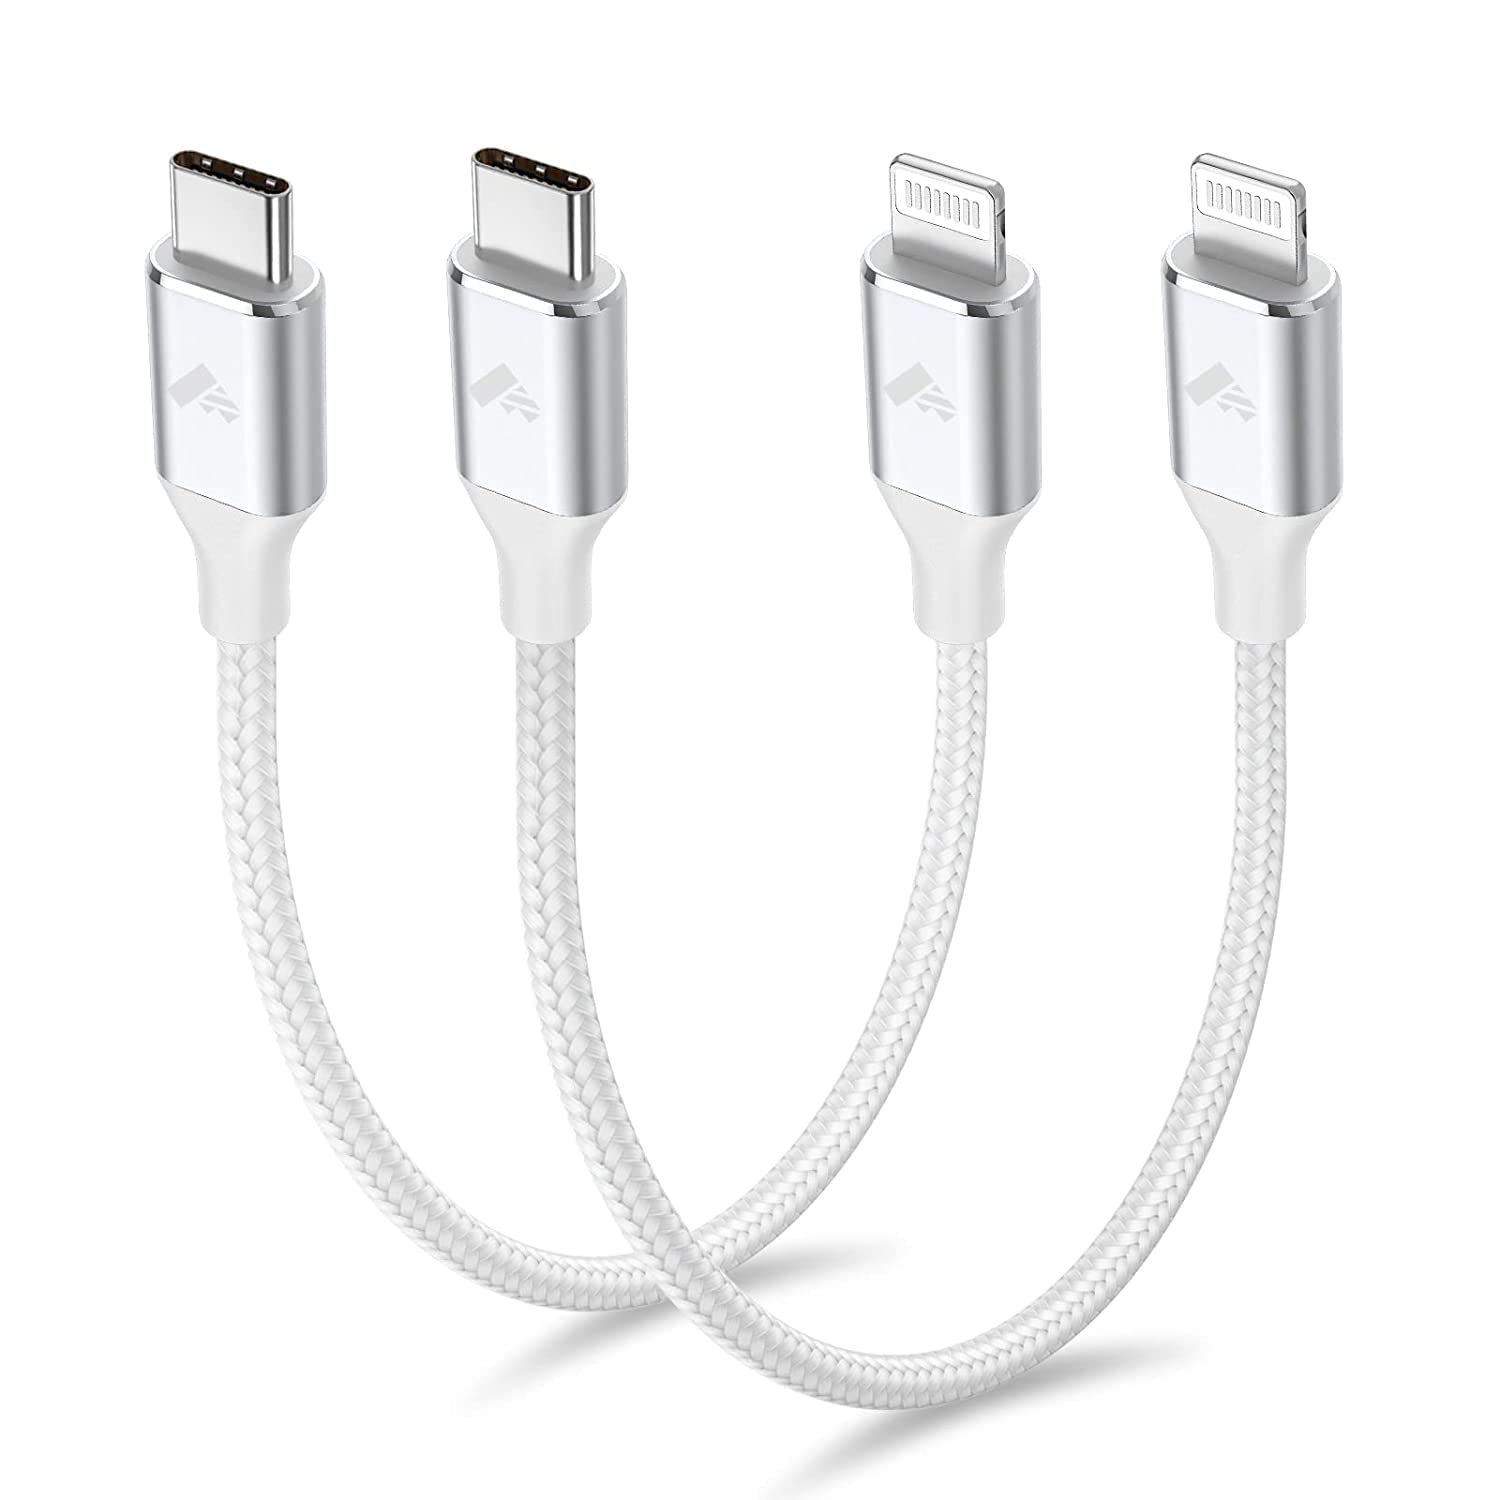 iPhone Charger Cable 2m, [ Apple MFi Certified ]2Pack Lightning to